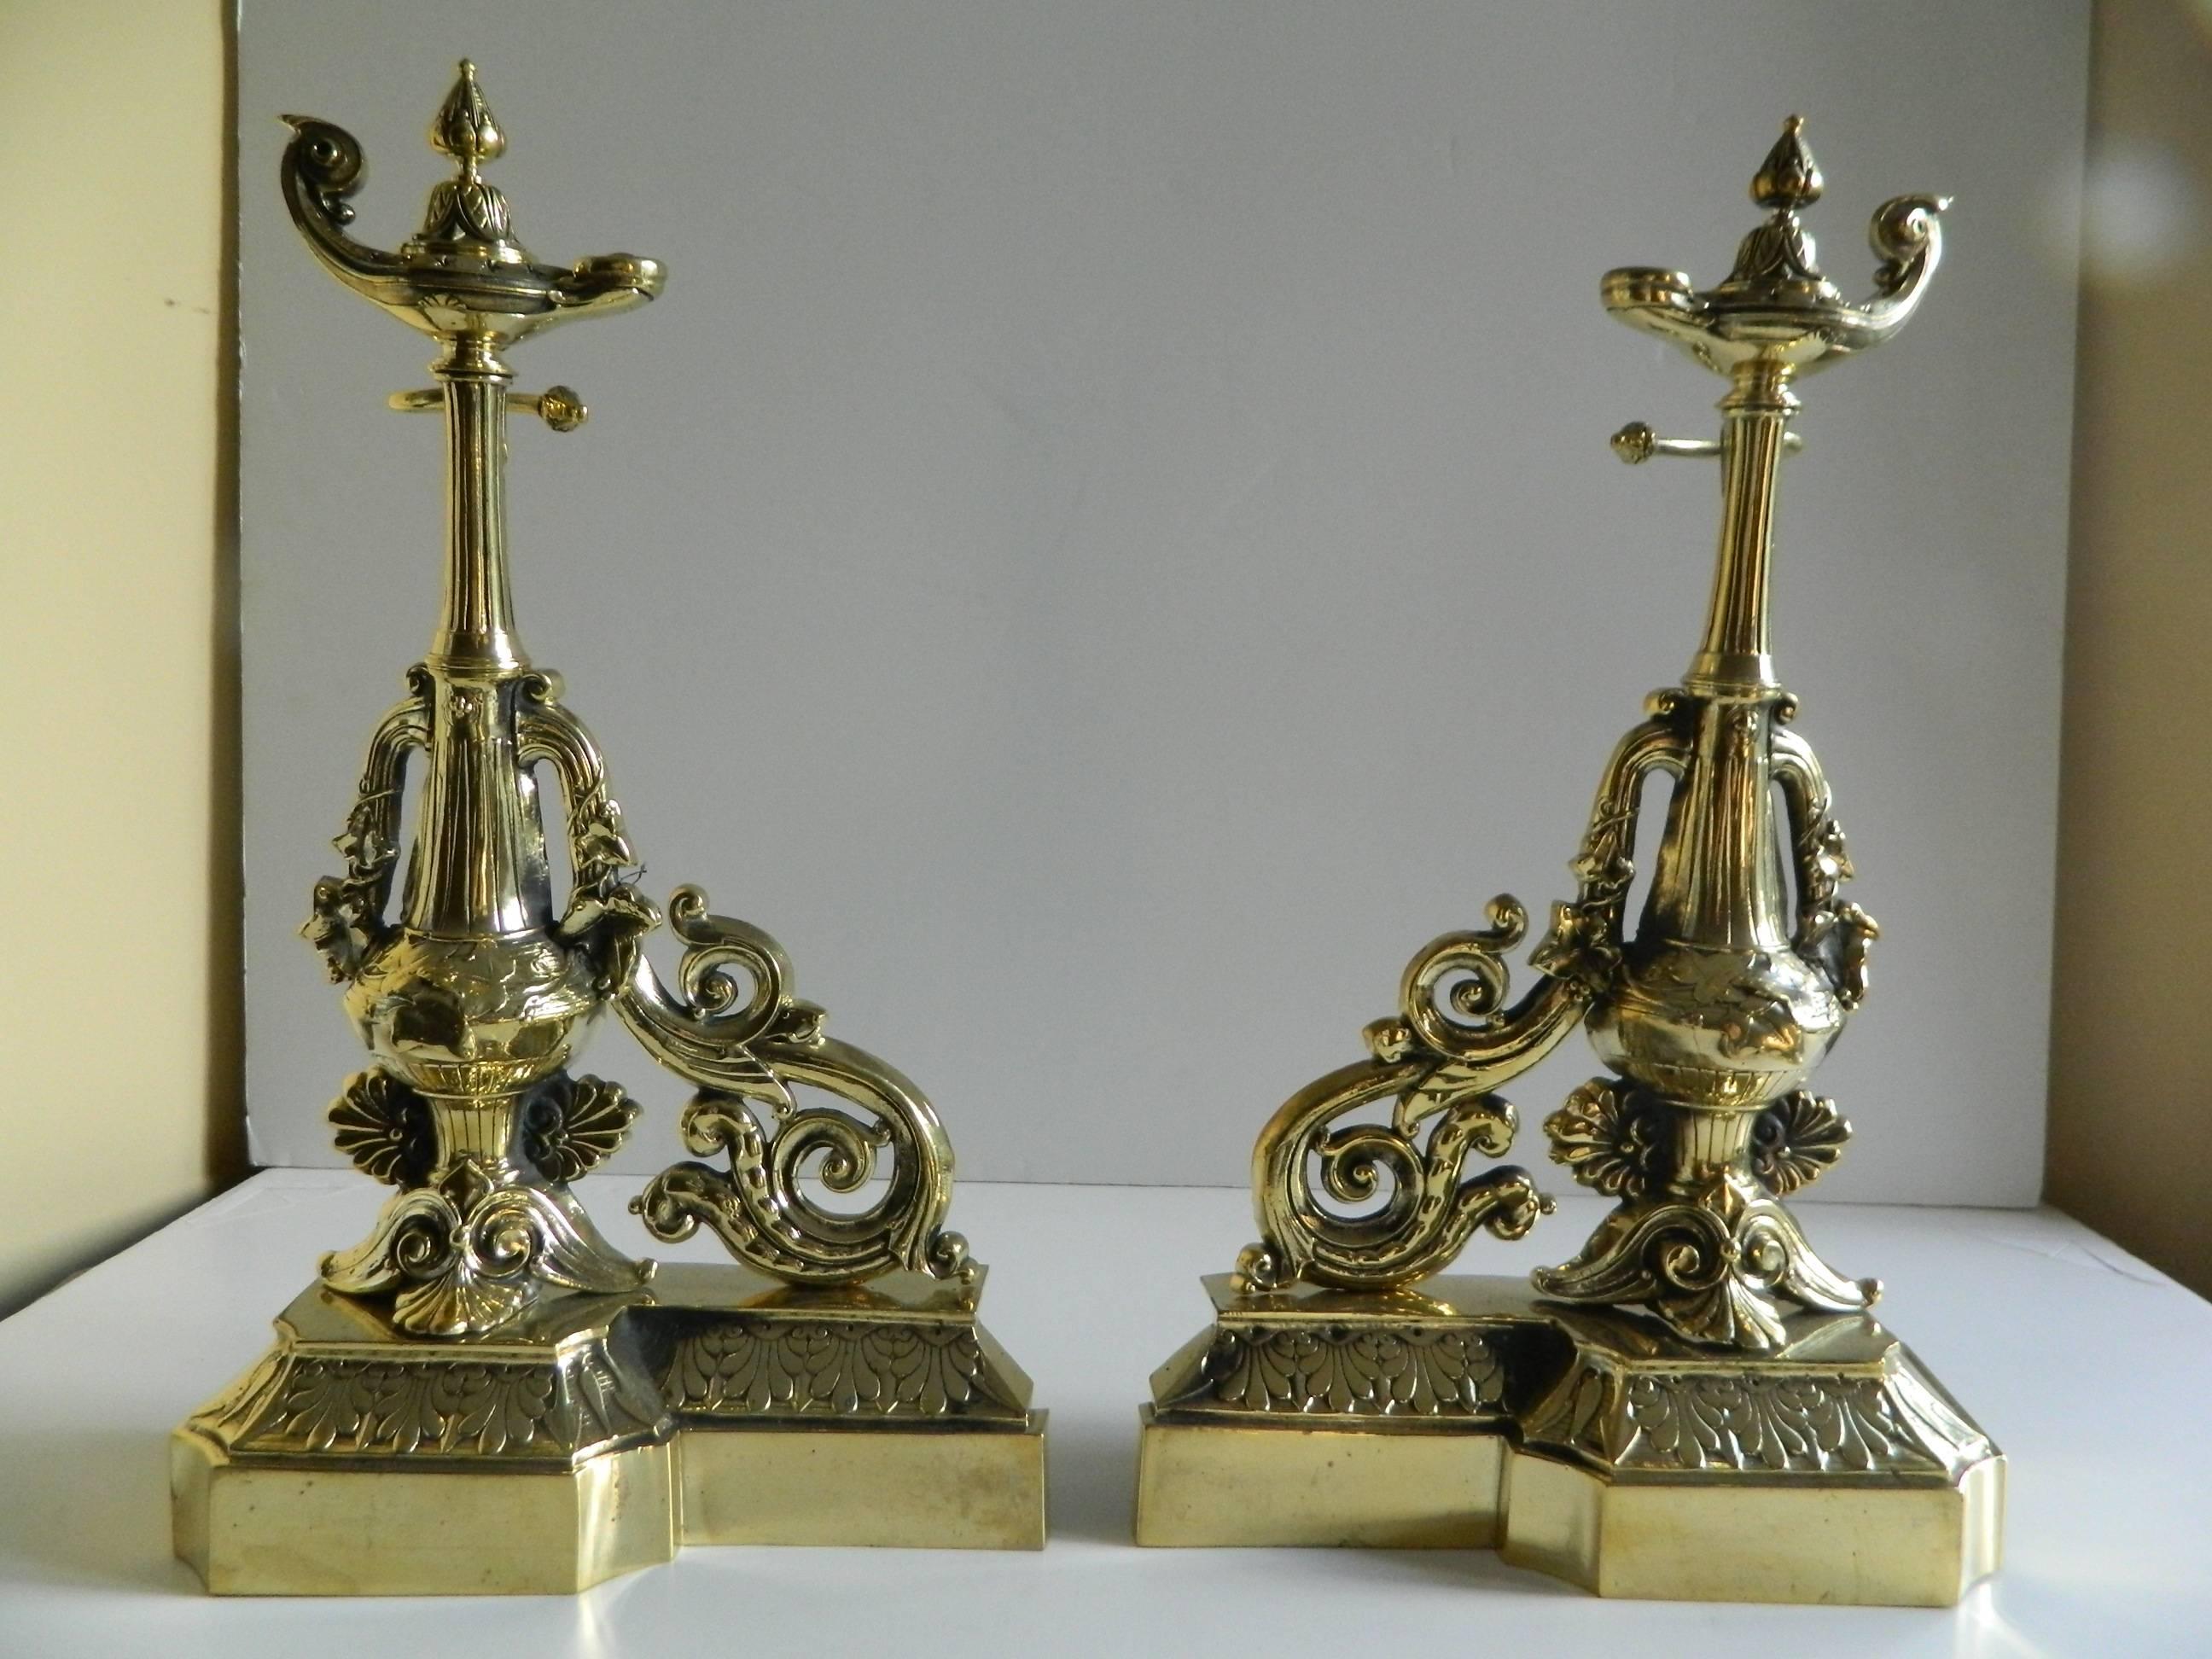 Pair of brass chenets or andirons, magical or oil lamp motif, 19th century.